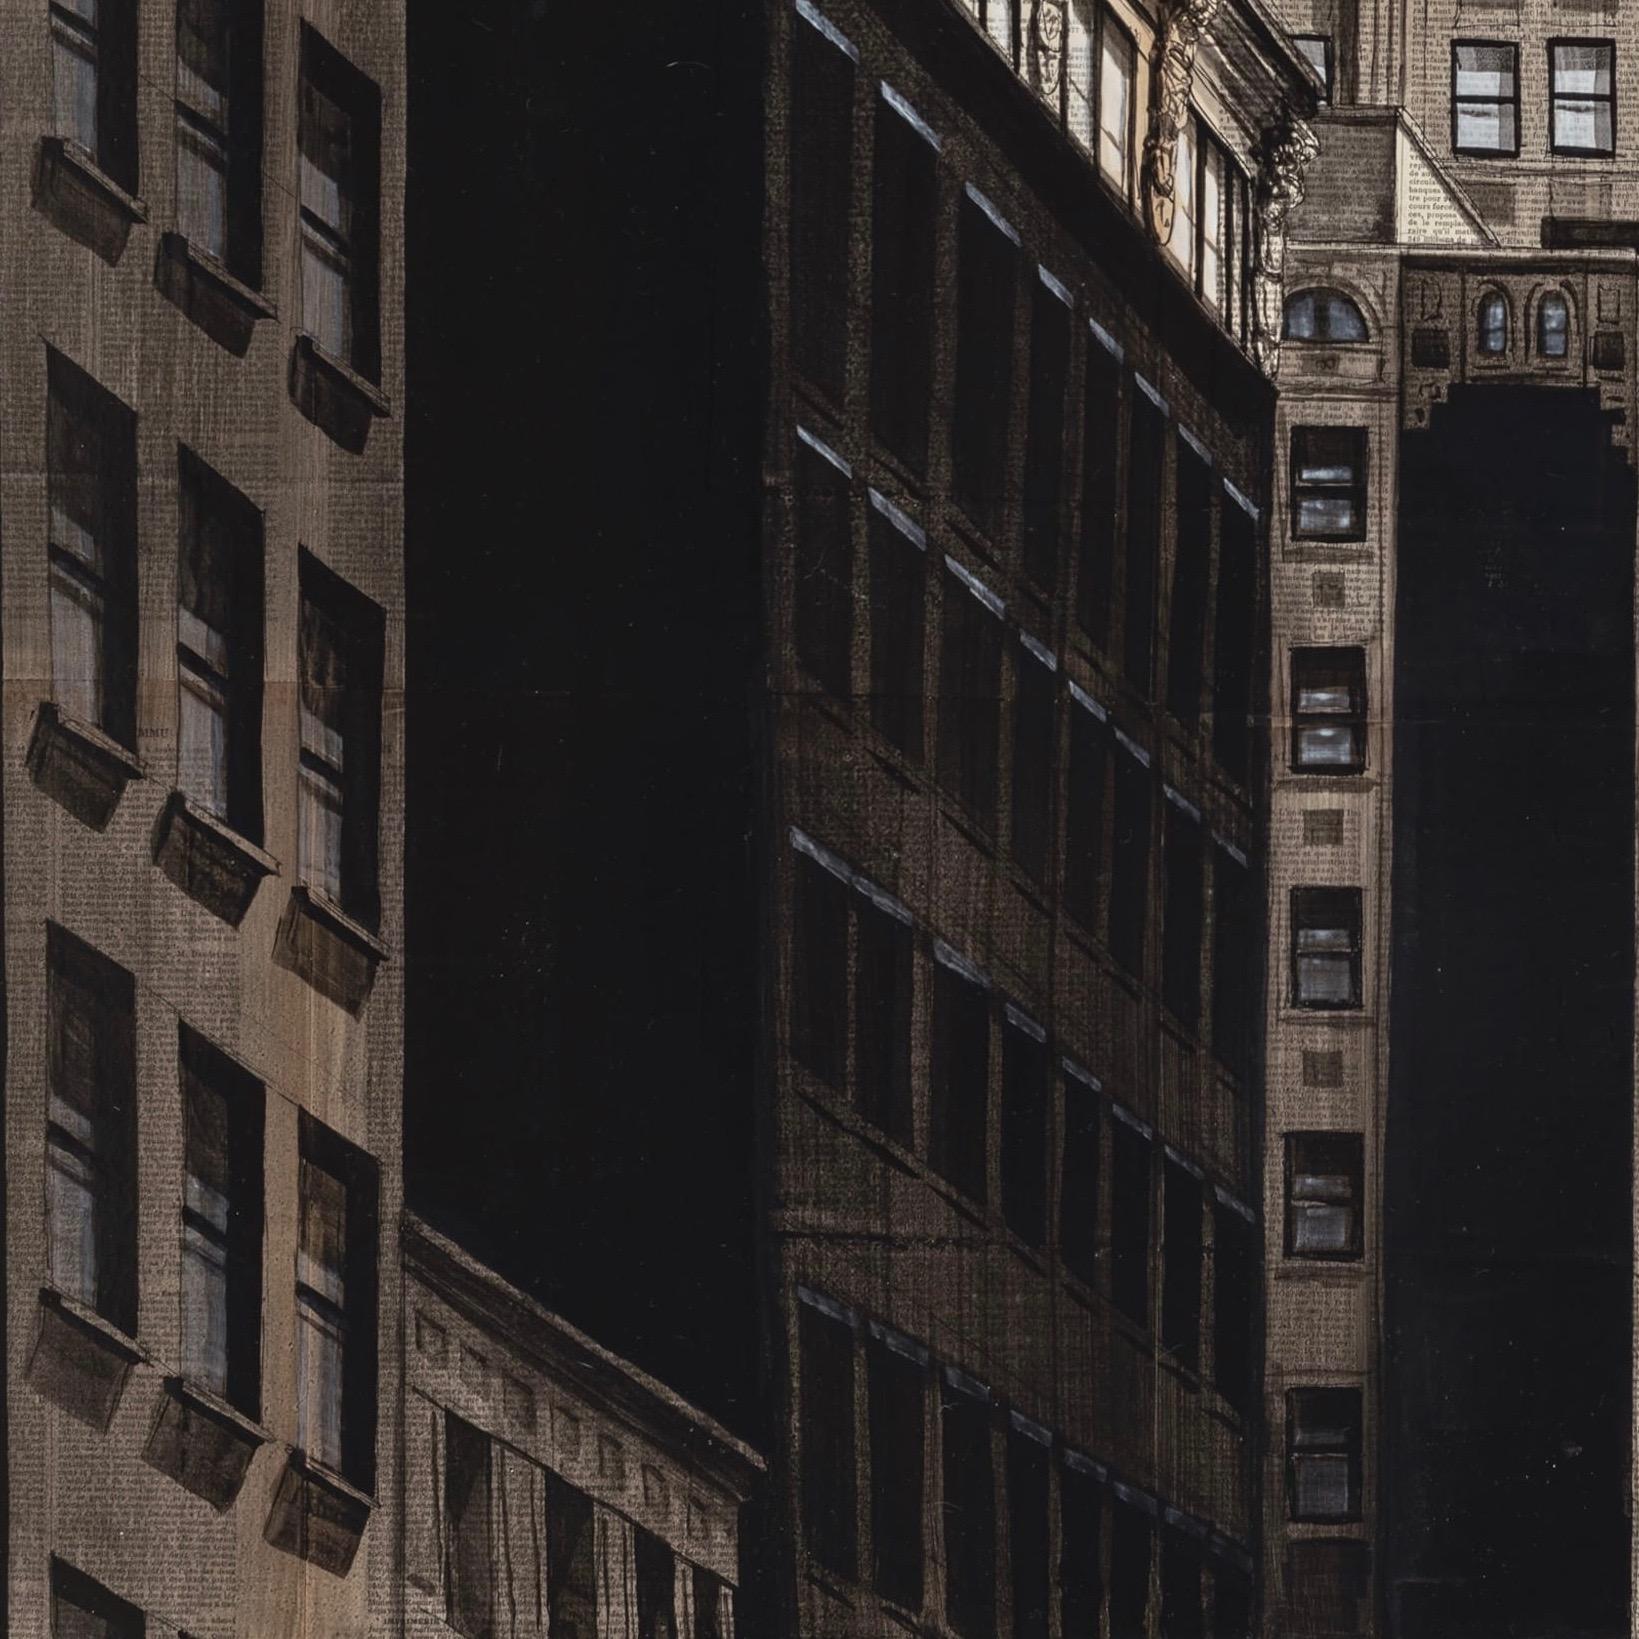 Gothica is a painting by French contemporary painter Guillaume Chansarel. 
Through his figurative paintings, Guillaume Chansarel seeks to capture the graphic identity of a city (in this case, New York City), in the same way as an architecture